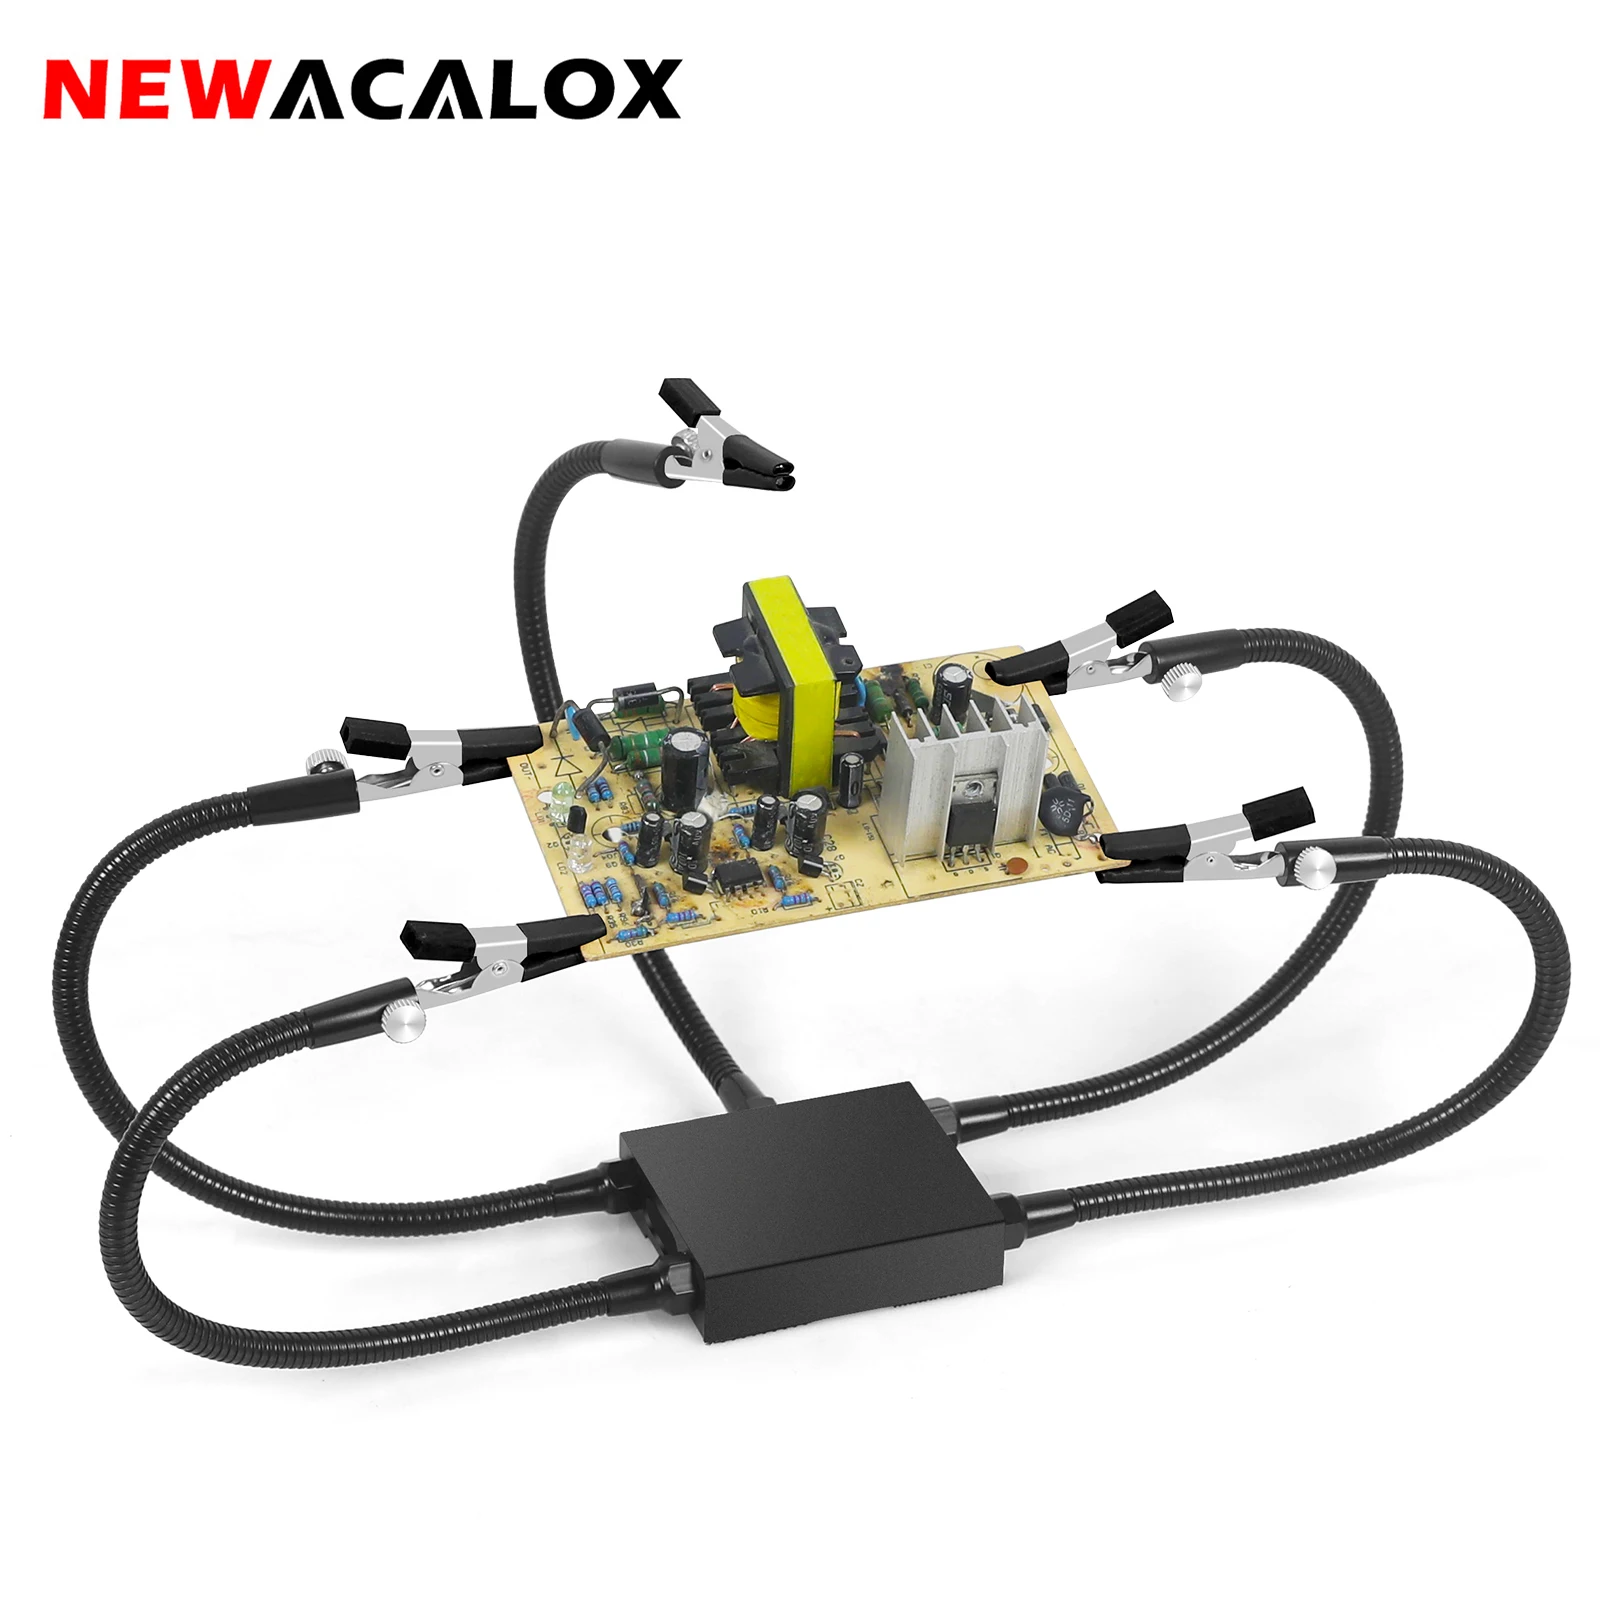 

NEWACALOX Third Helping Hand Soldering Station 5pcs Flexible Arms PCB Holder Welding Repairing Workbench Alligator Clip Tool